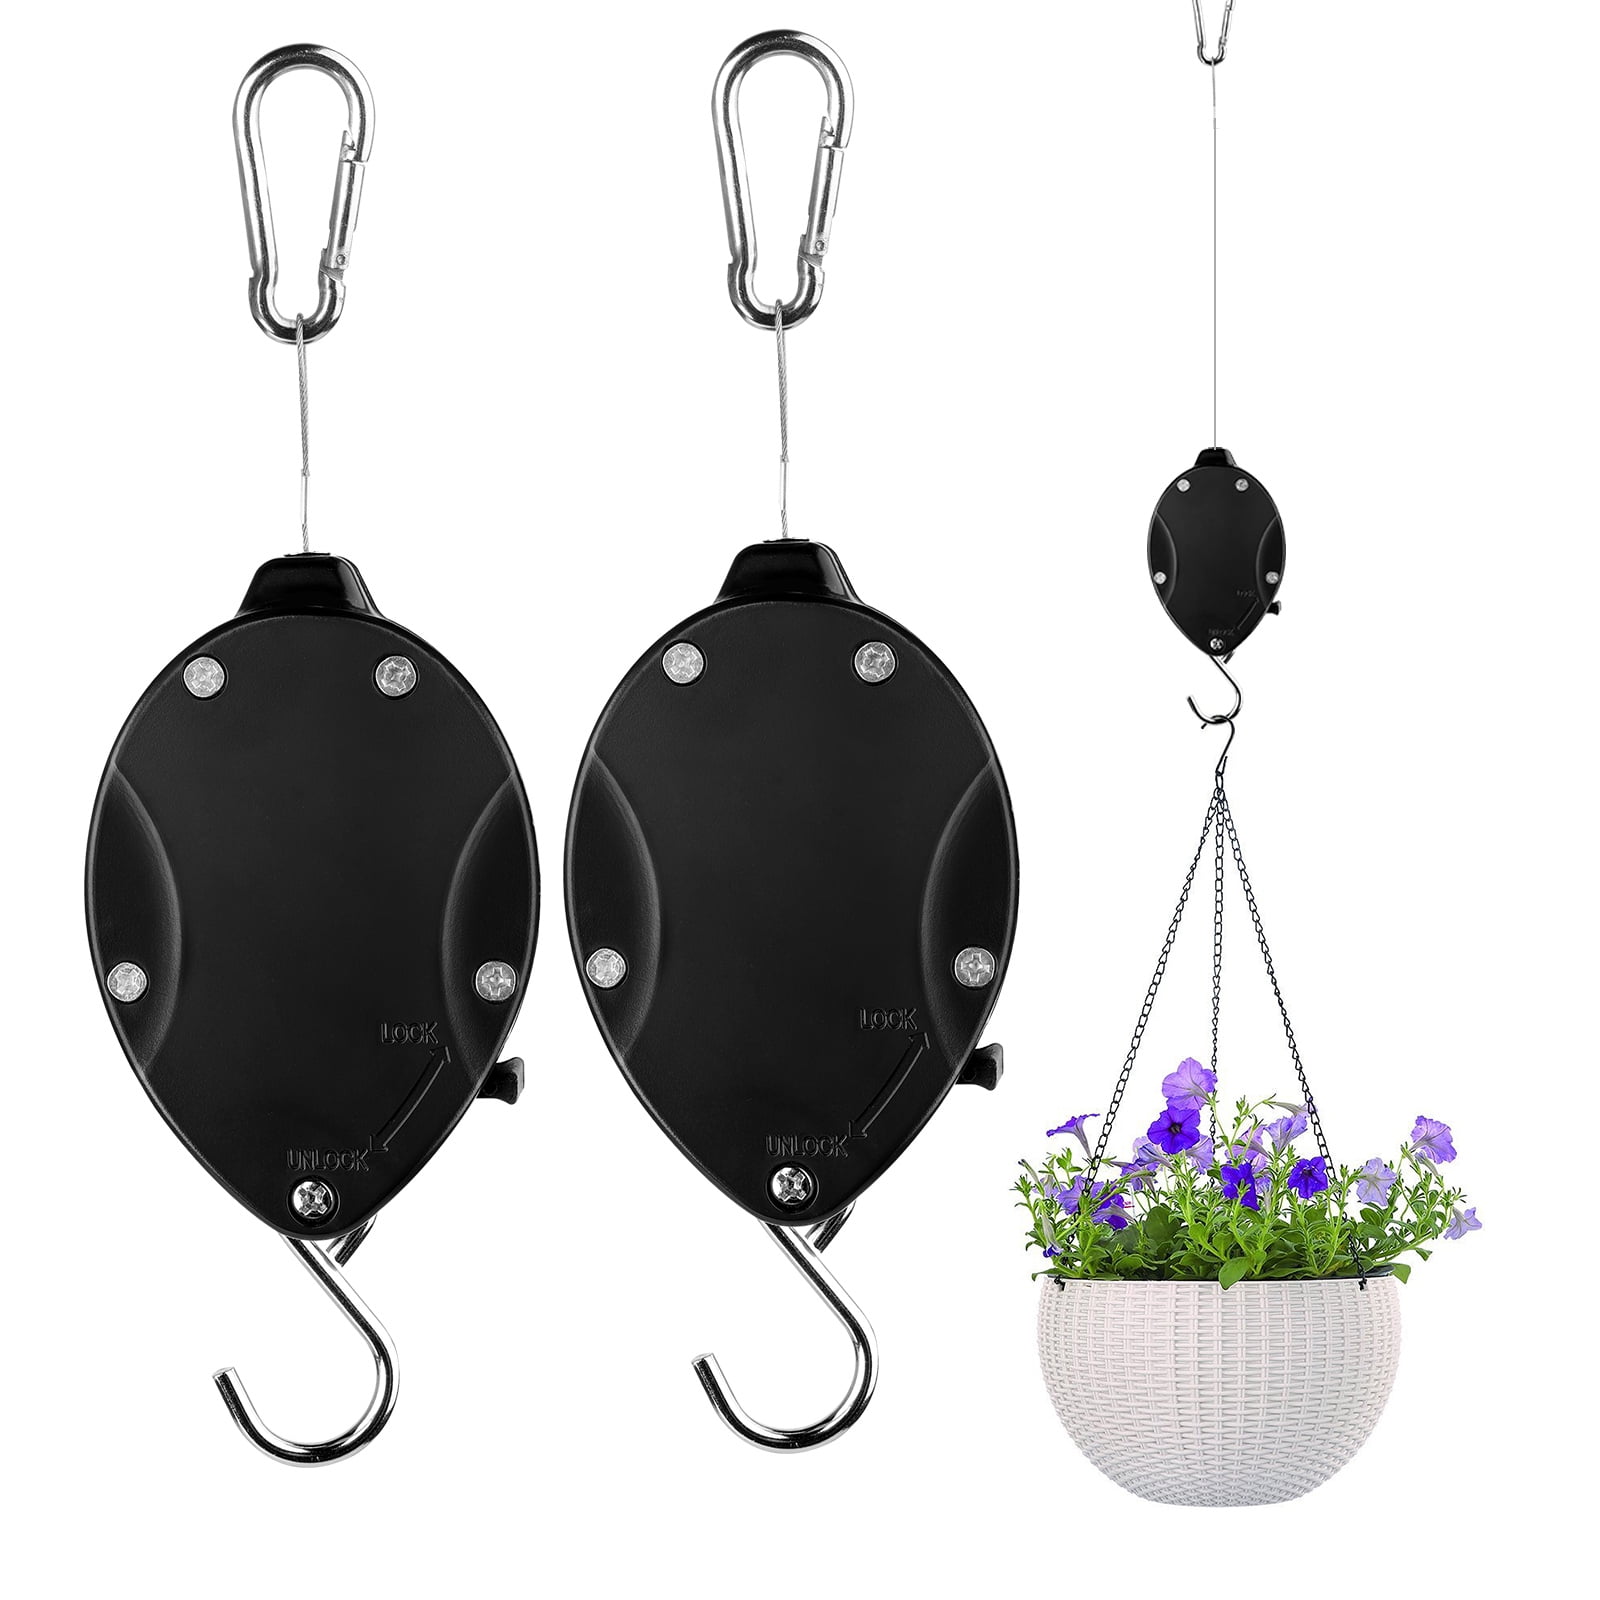 2pcs Retractable Plant Pulley Adjustable Hanging Flower Basket Hook for Garden Baskets Pots and Birds Feeder Hanging Basket in Different Height Lower and Raise 